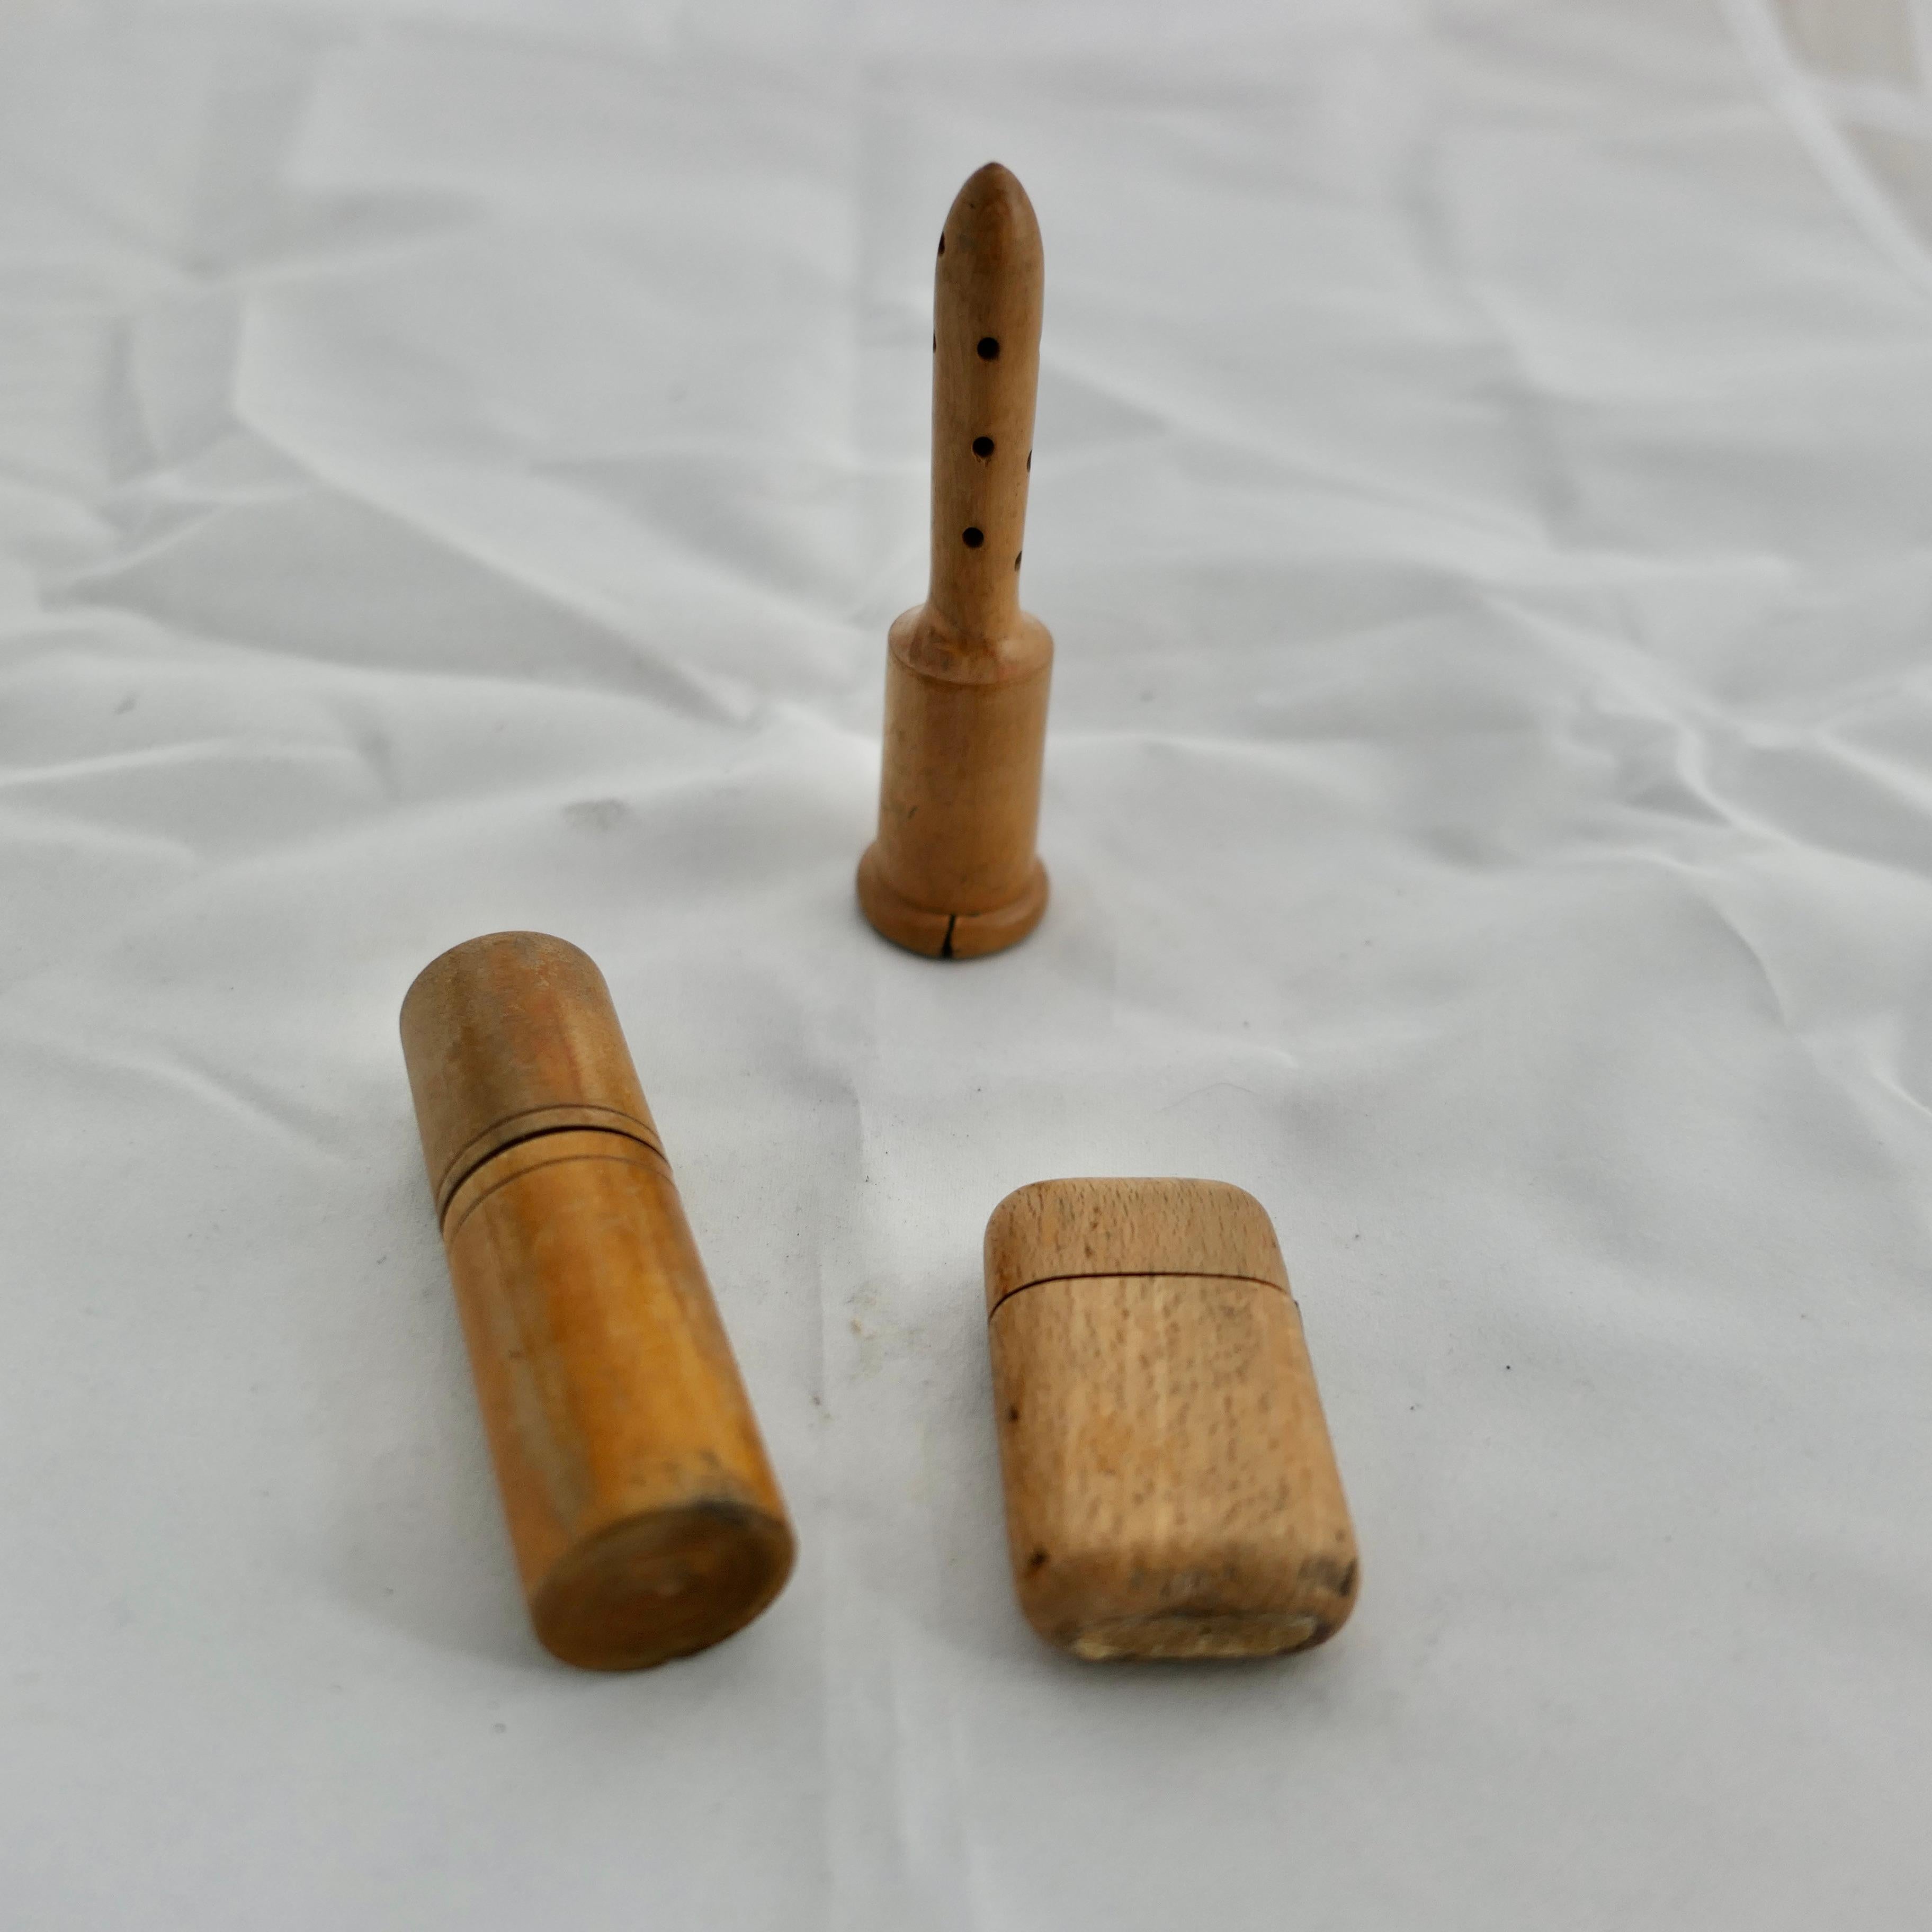 3 19th century Hand Made Treen Items, Powder, Perfume and Matches

A Glove powderer in sycamore, Glass perfume bottle in turned beech case and a beech vesta with brass hinge and matches
The glove powderer is  is 4” in diameter and 2” high
SC87